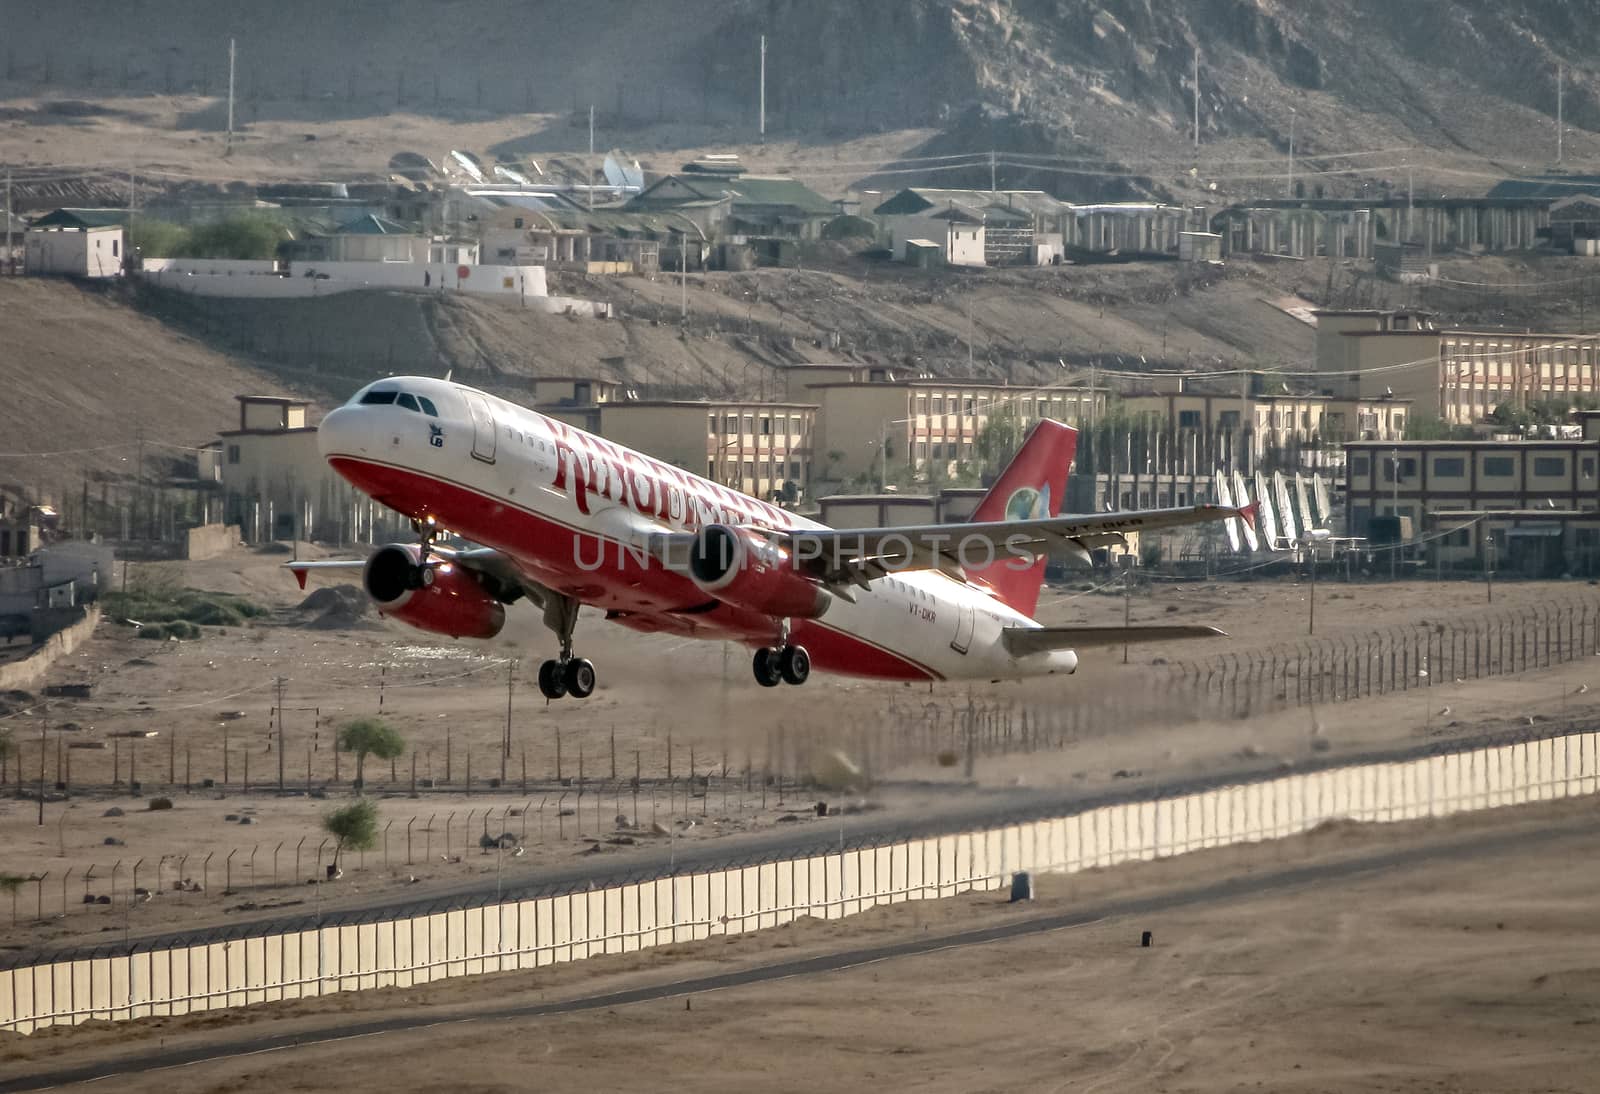 Leh, Jammu and Kashmir, India - June 26, 2011 : Kingfisher Airlines airbus A-320 # VT-DKR takes off from Leh by lalam